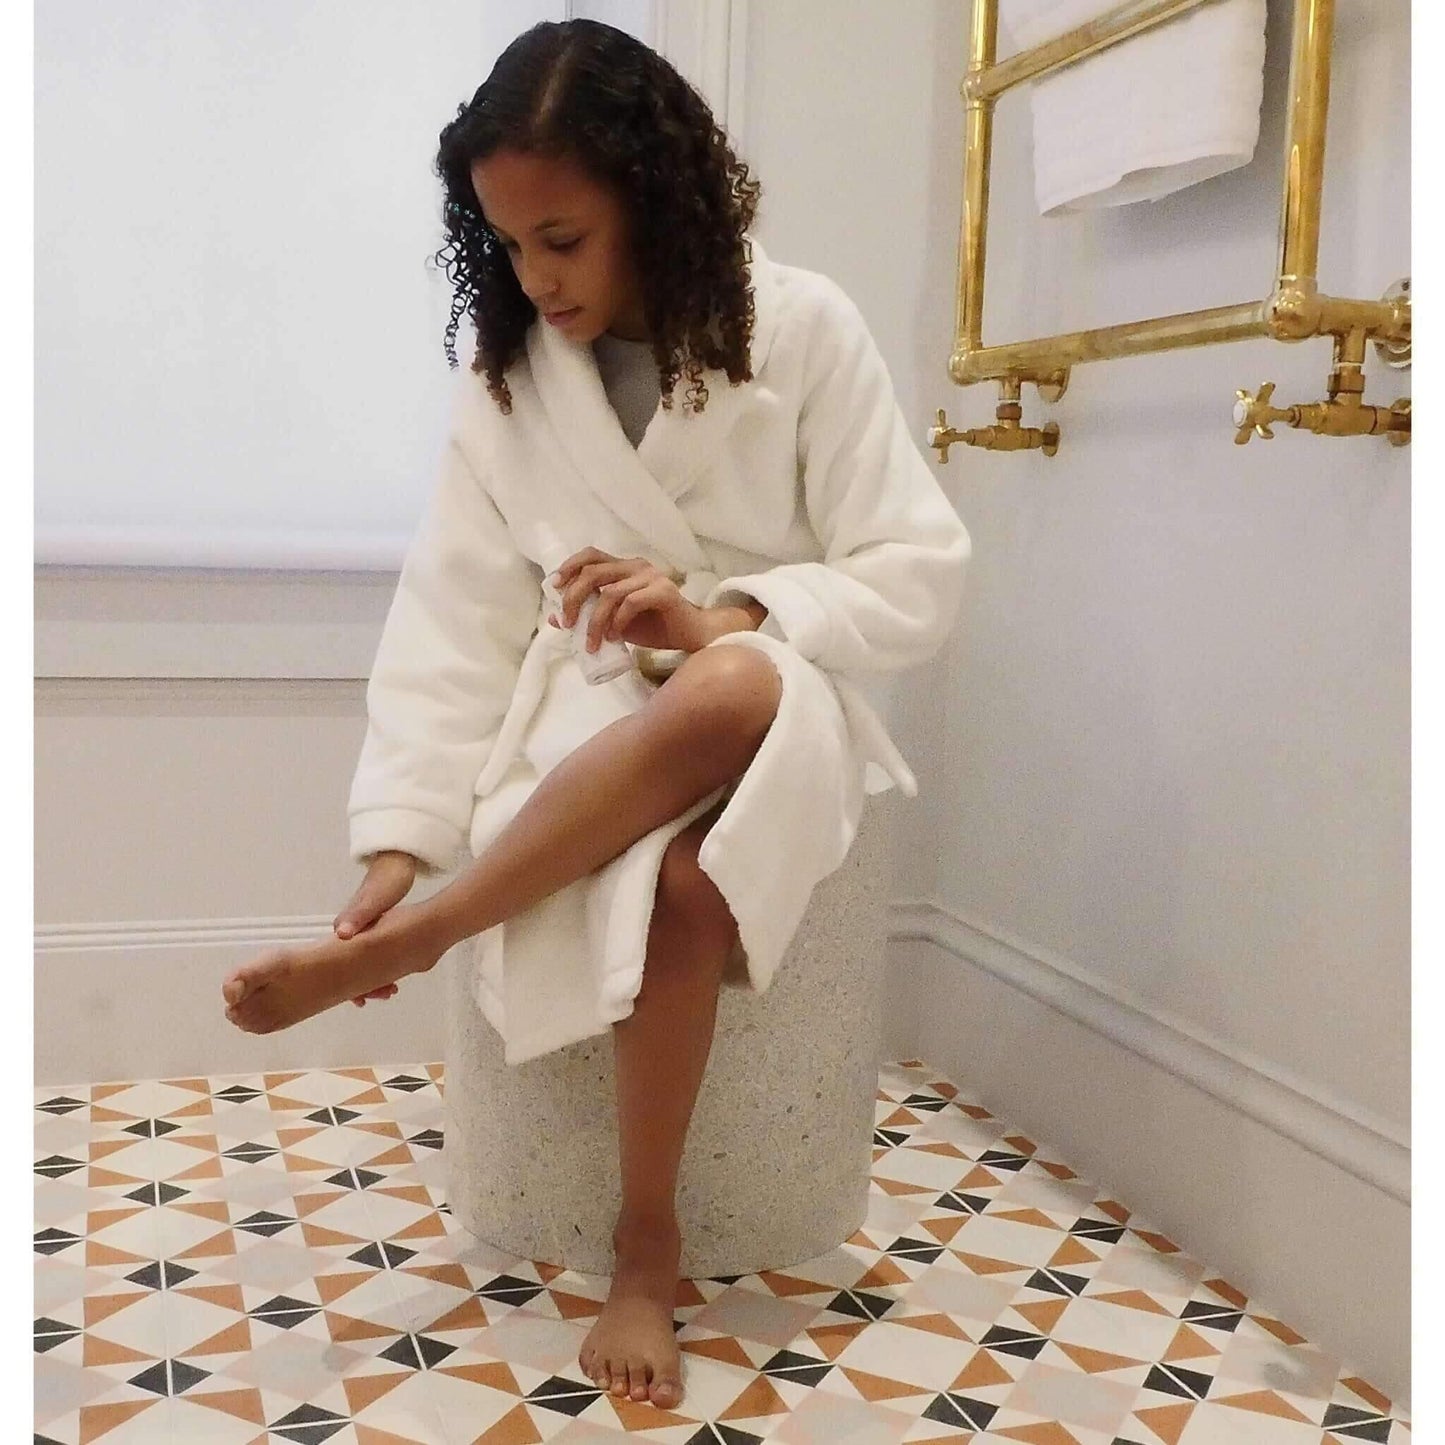 girl in white robe applying talc free lotion to feet